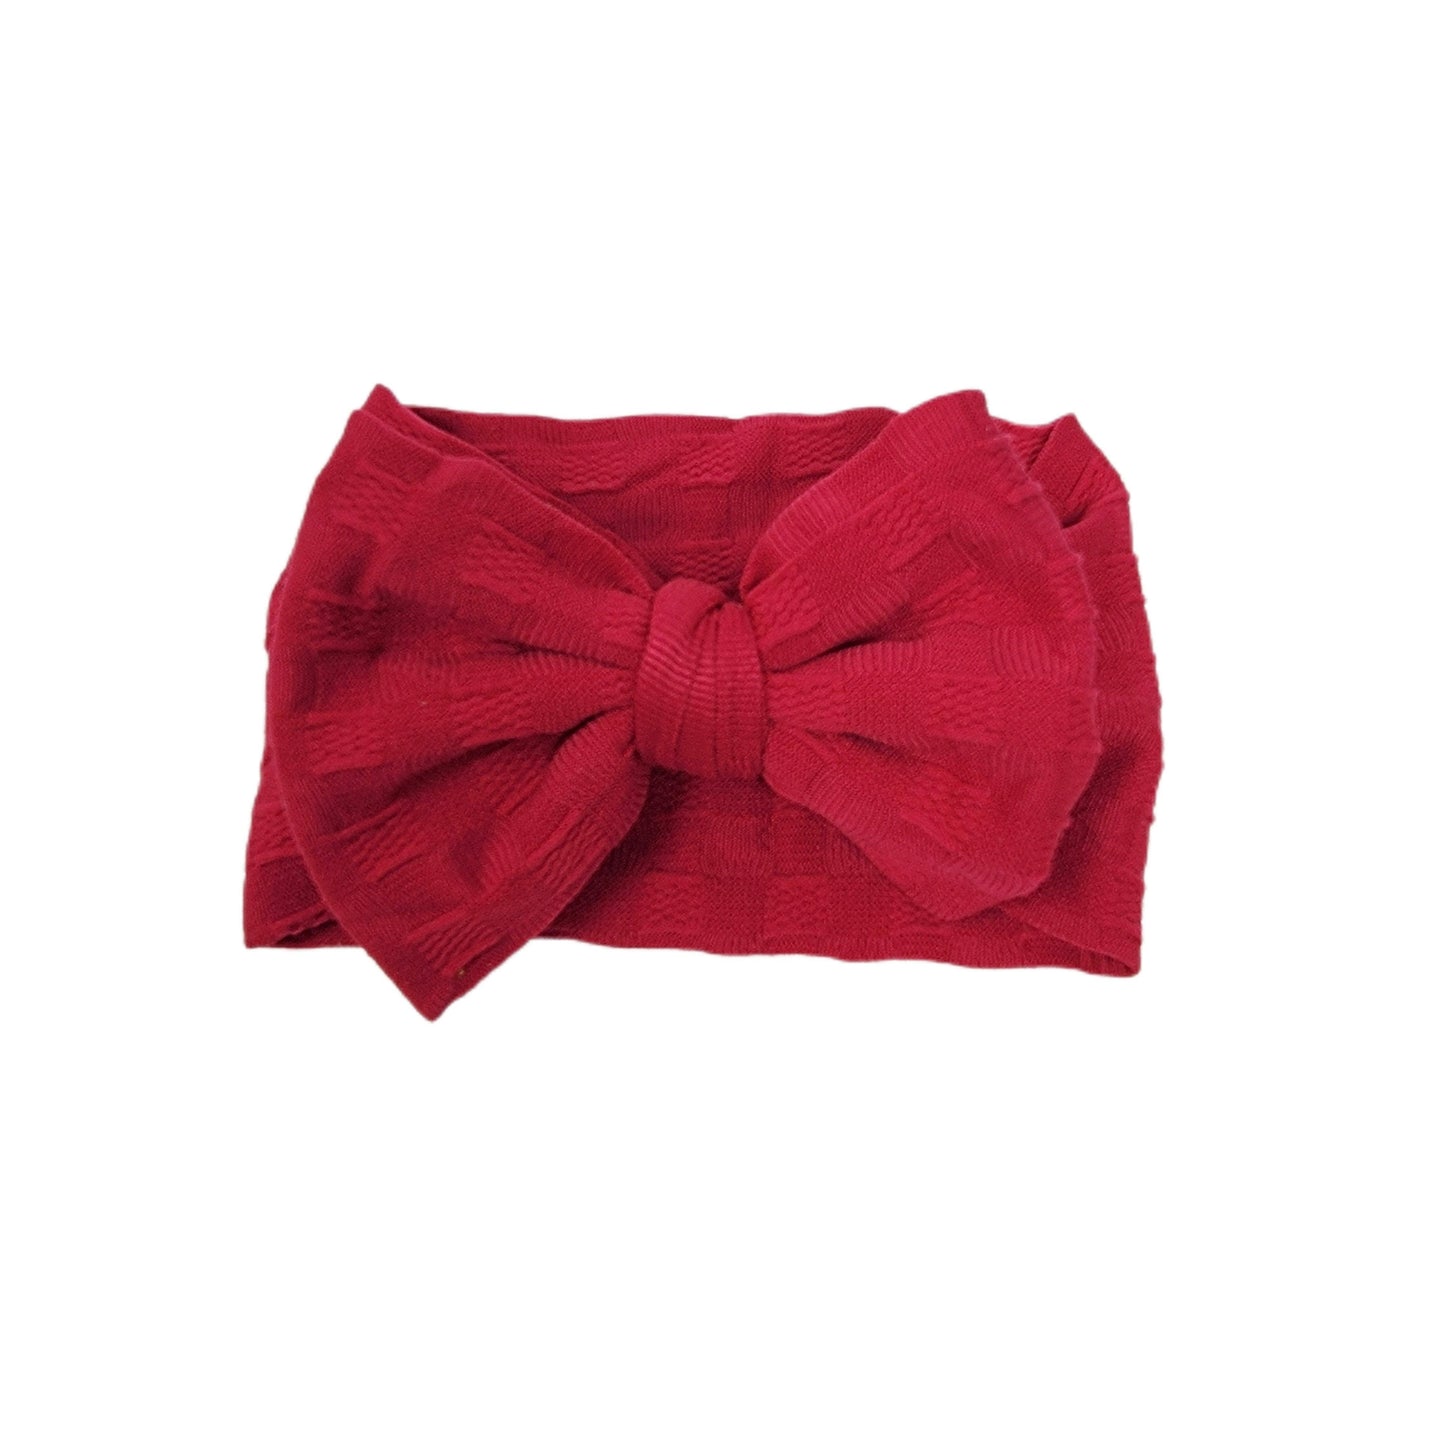 Cranberry Woven Knit Fabric Headwrap 4" 